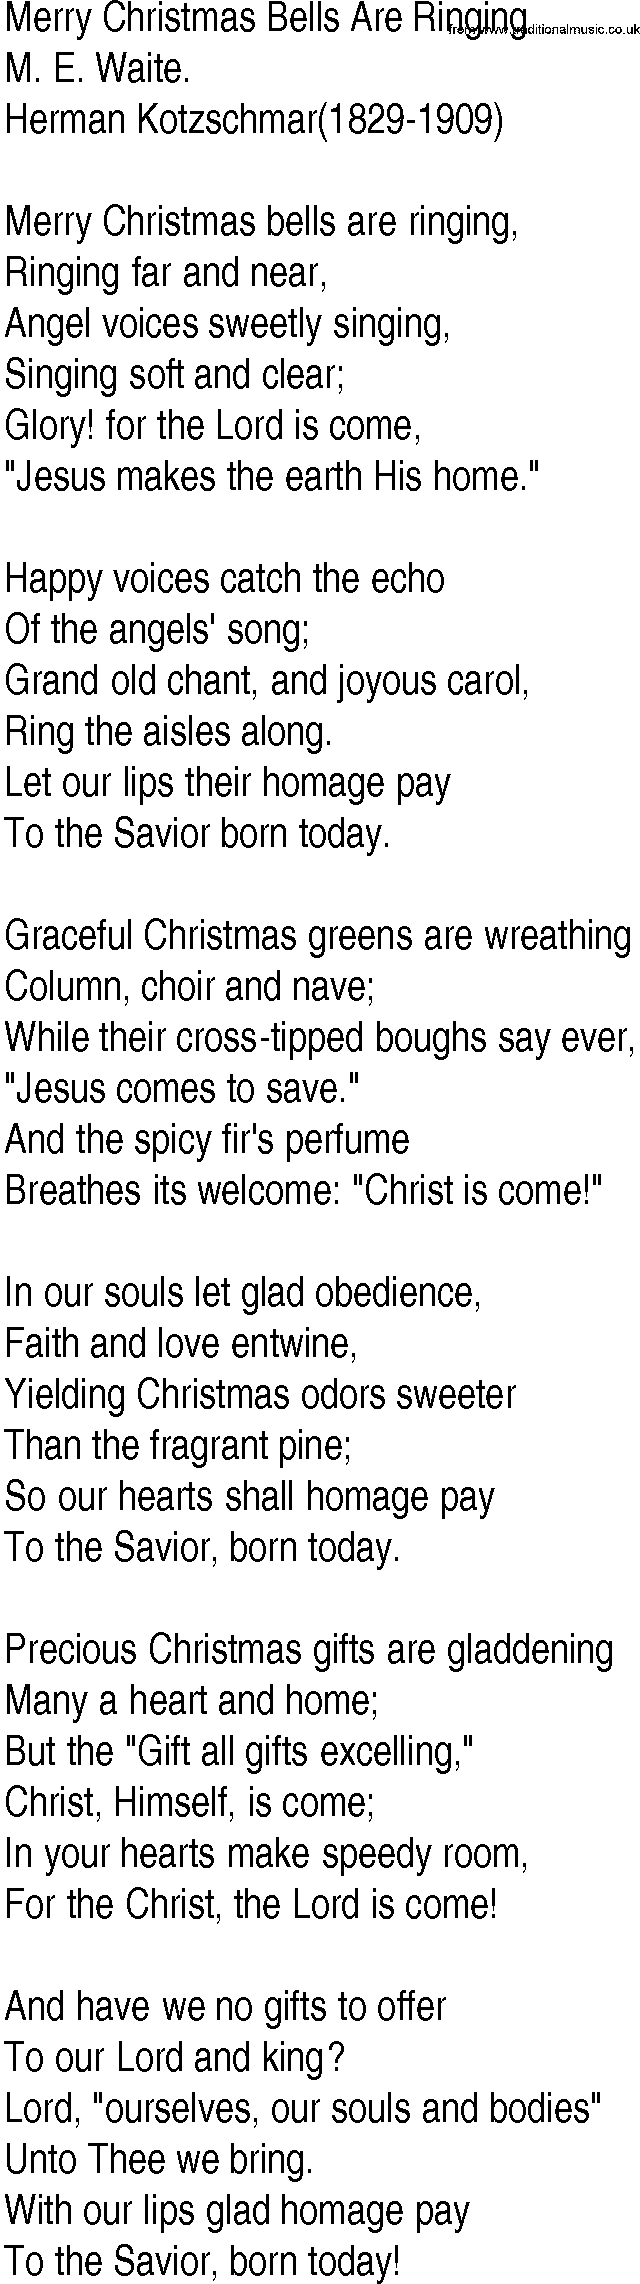 Hymn and Gospel Song: Merry Christmas Bells Are Ringing by M E Waite lyrics